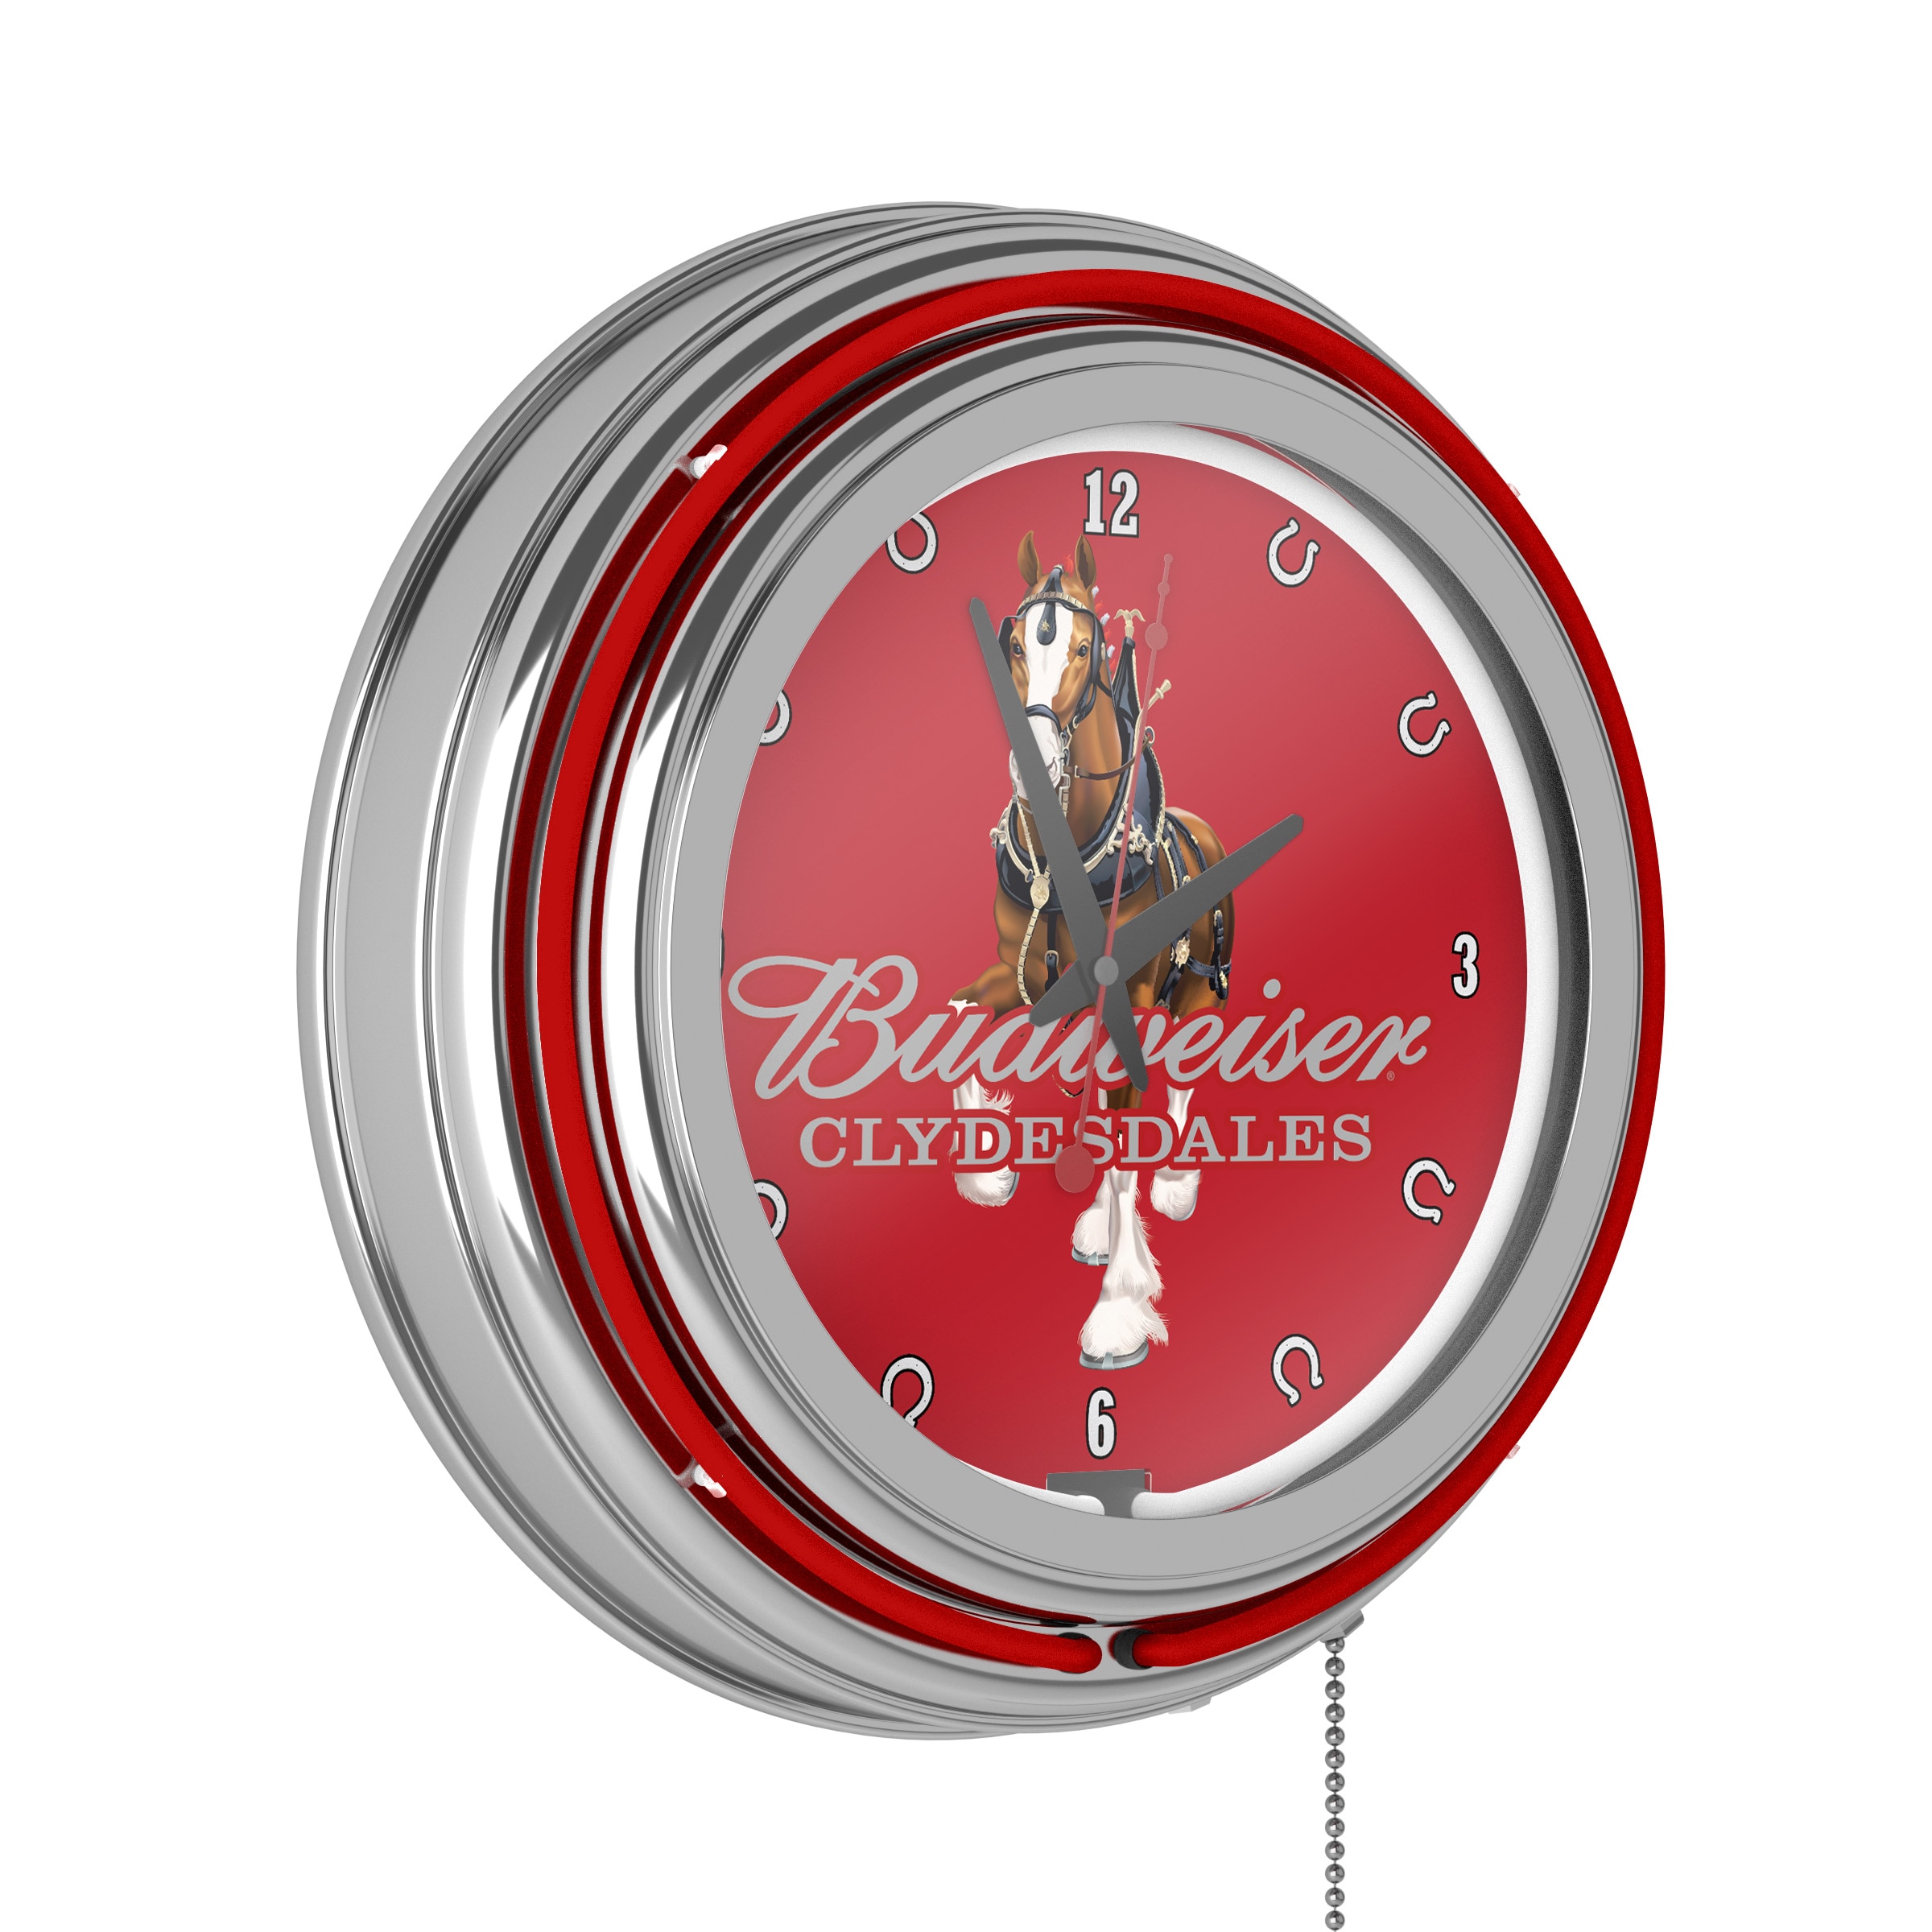 Trademark Gameroom Budweiser Chrome Double Rung Neon Clock - Clydesdale Red, Officially Licensed, Chrome Finish, Medium Size, Battery-Operated -  AB1400-CLY-R